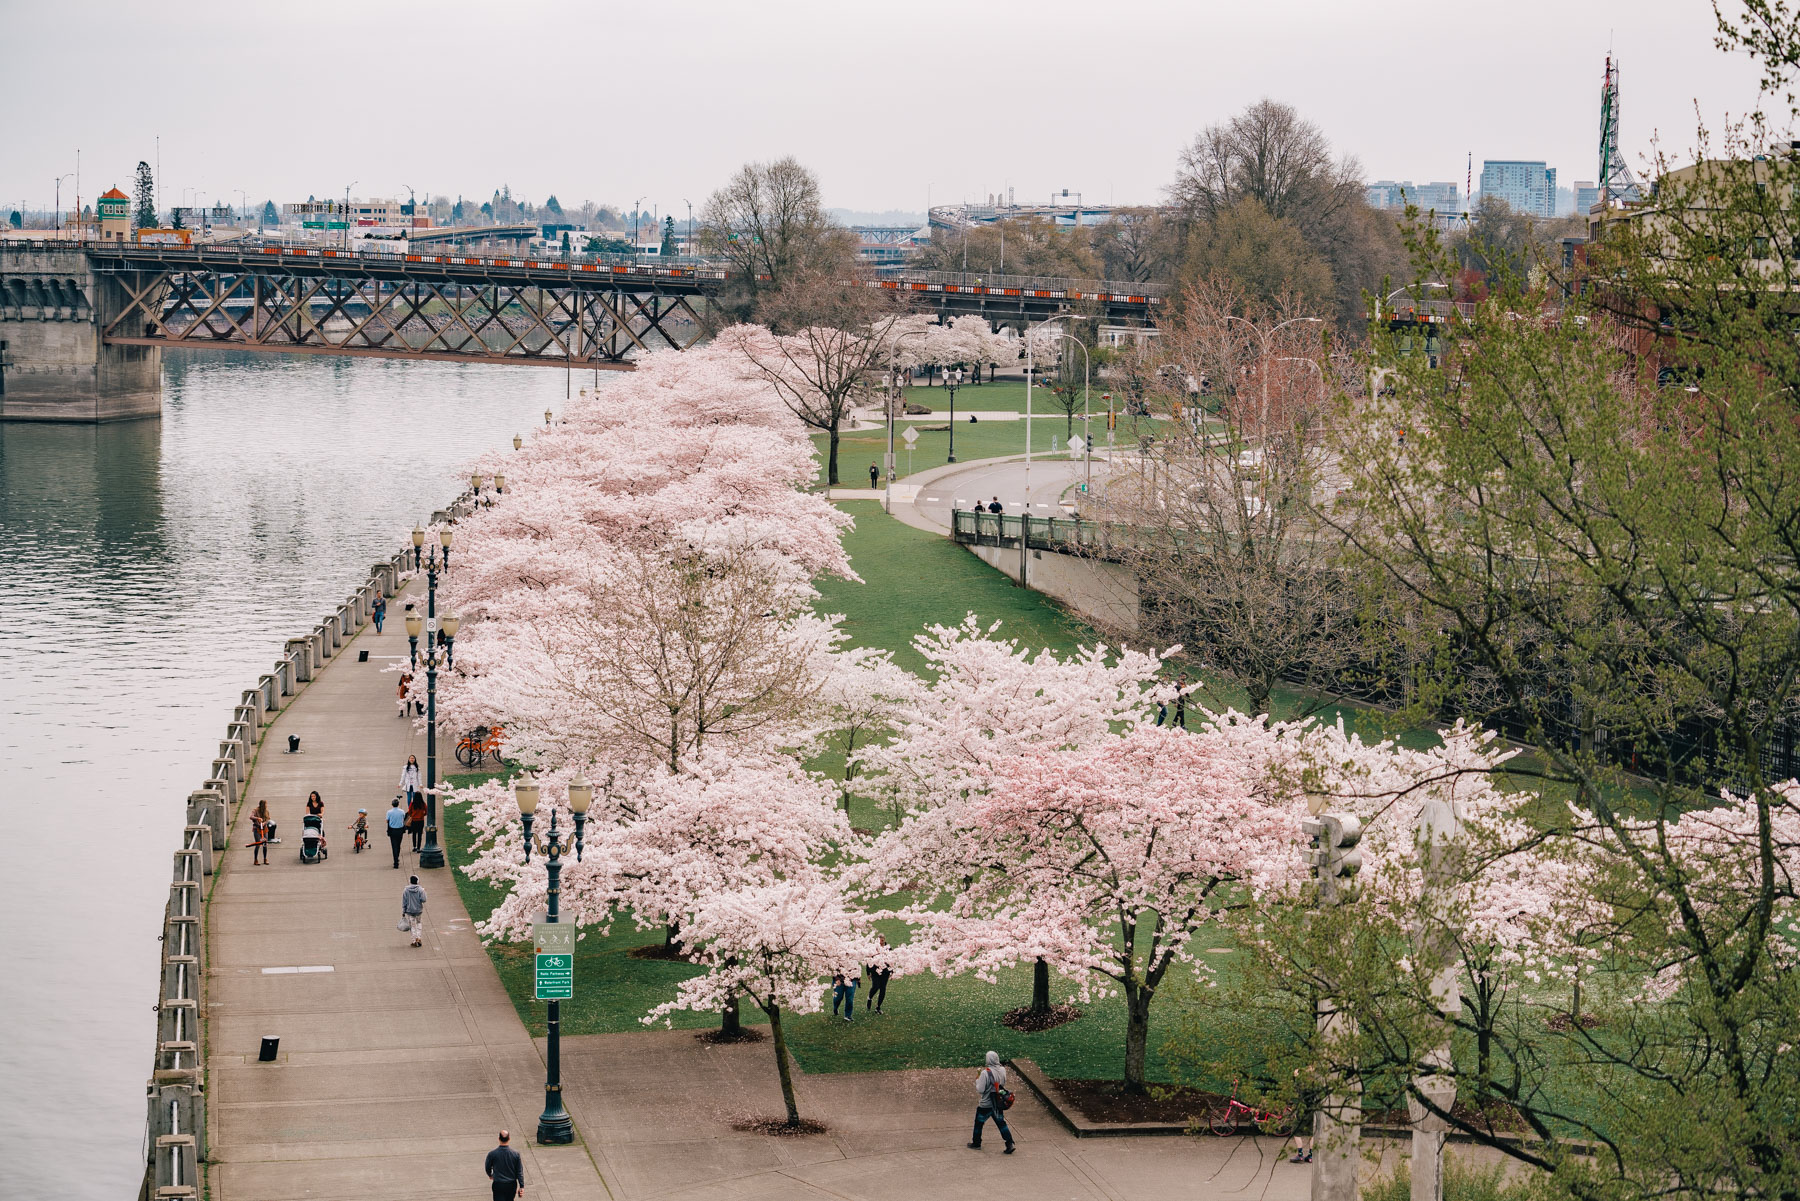 pros and cons of living in Portland Oregon